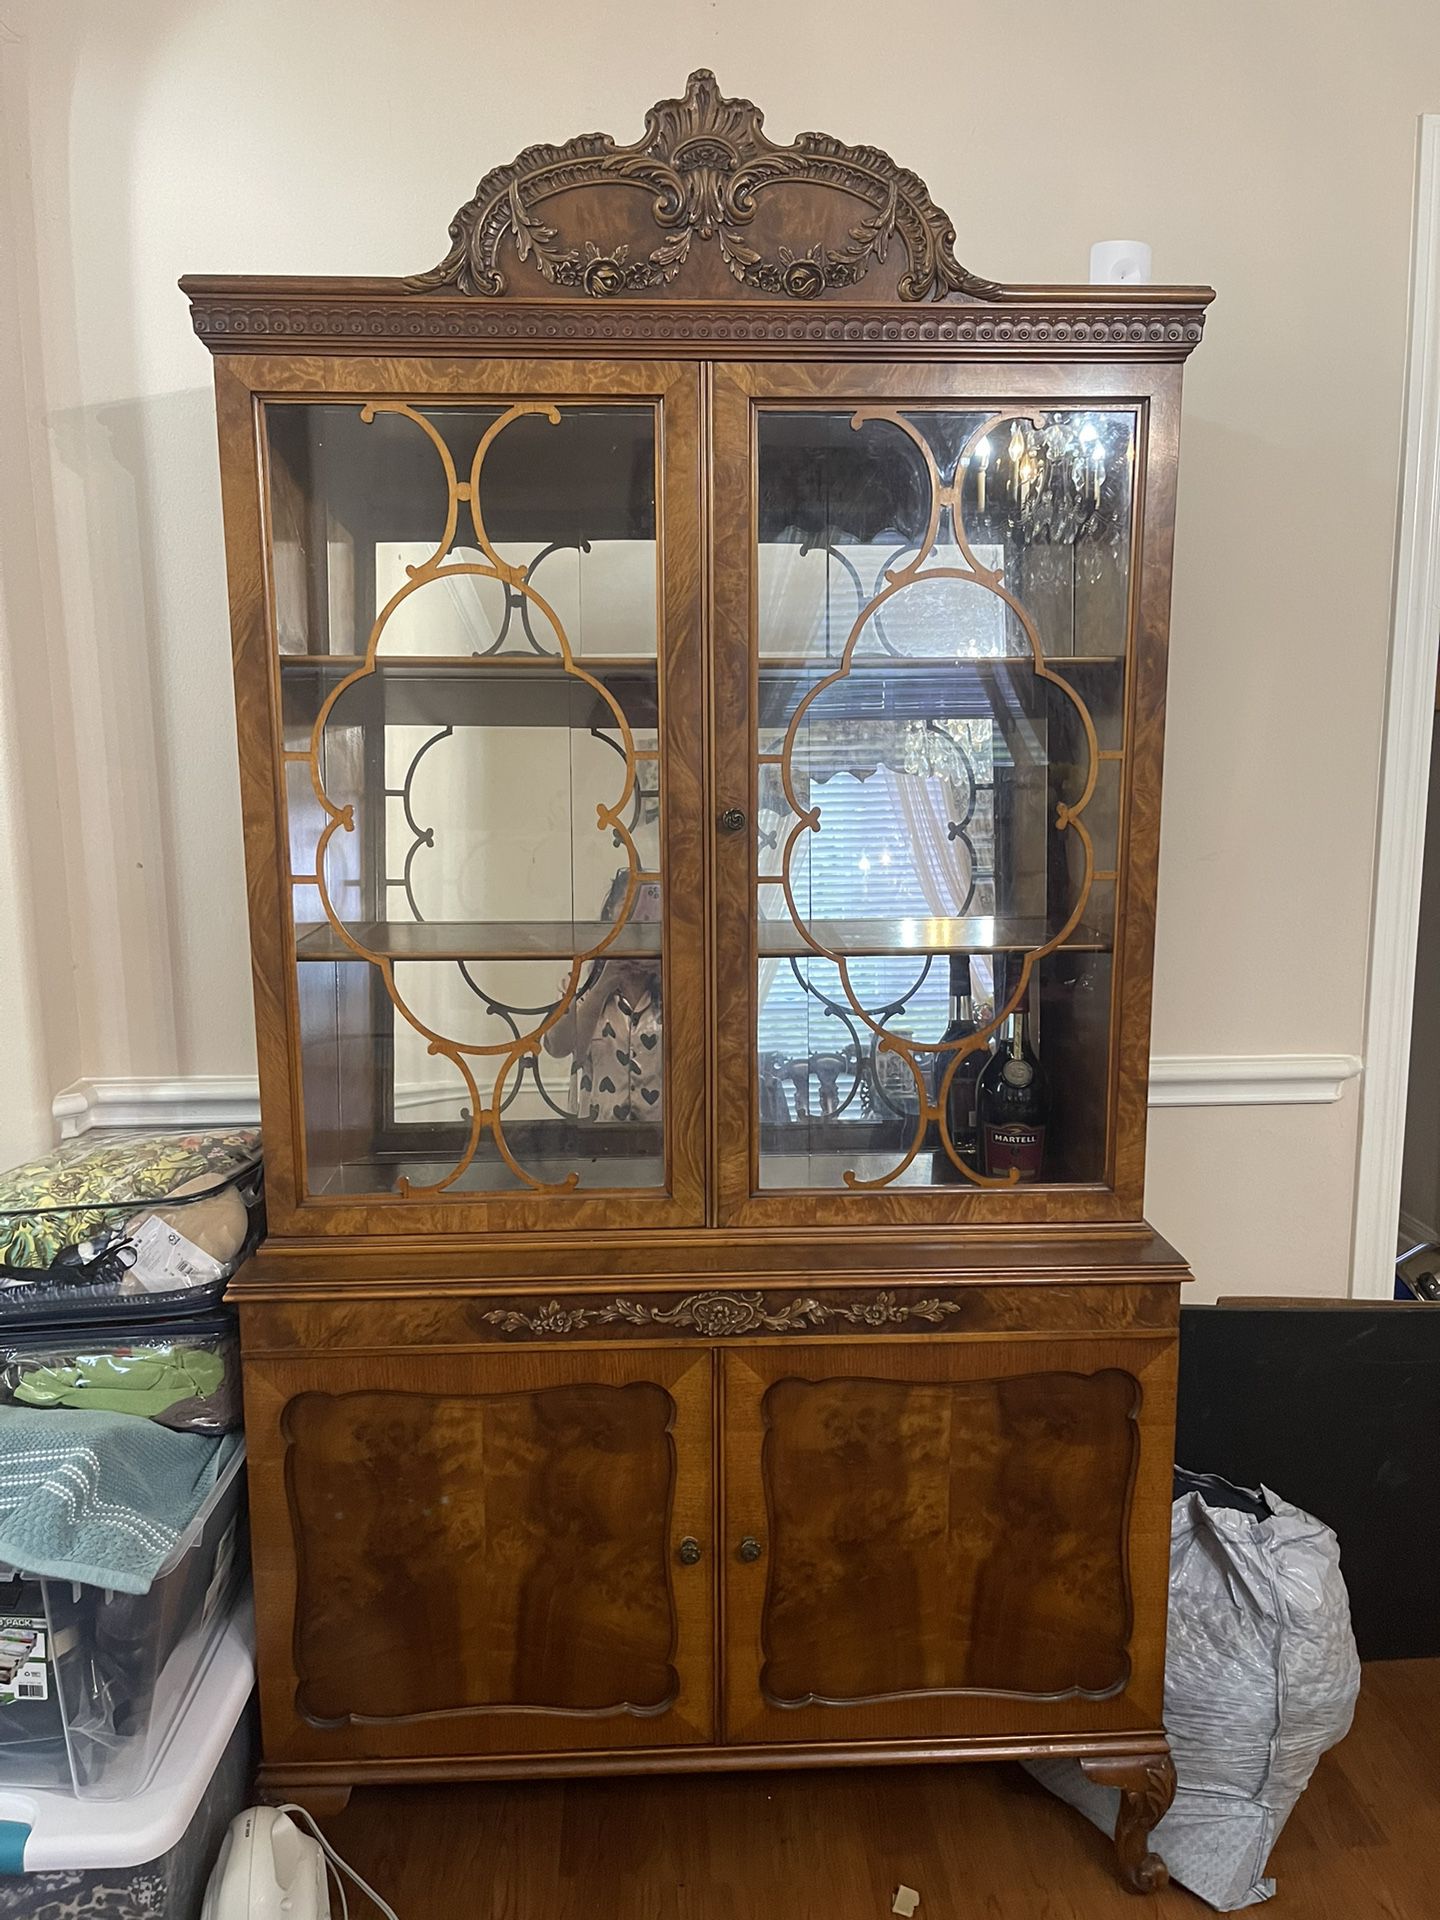 Curio/ China Cabinet With Intricate Wood Carving Glass Interior , Shelves  and Doors